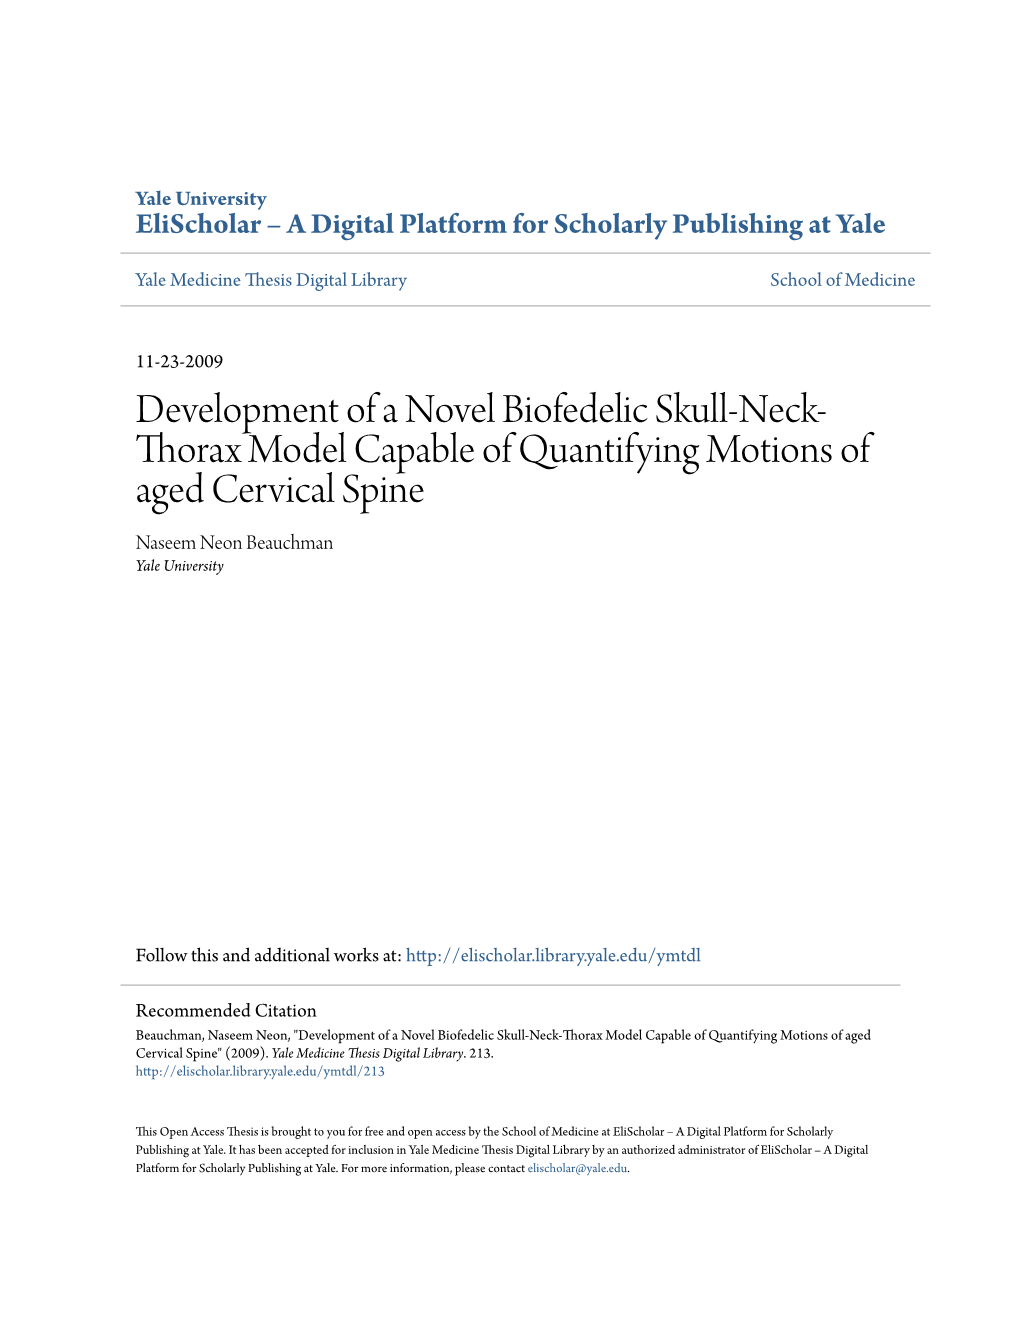 Development of a Novel Biofedelic Skull-Neck-Thorax Model Capable of Quantifying Motions of Aged Cervical Spine" (2009)